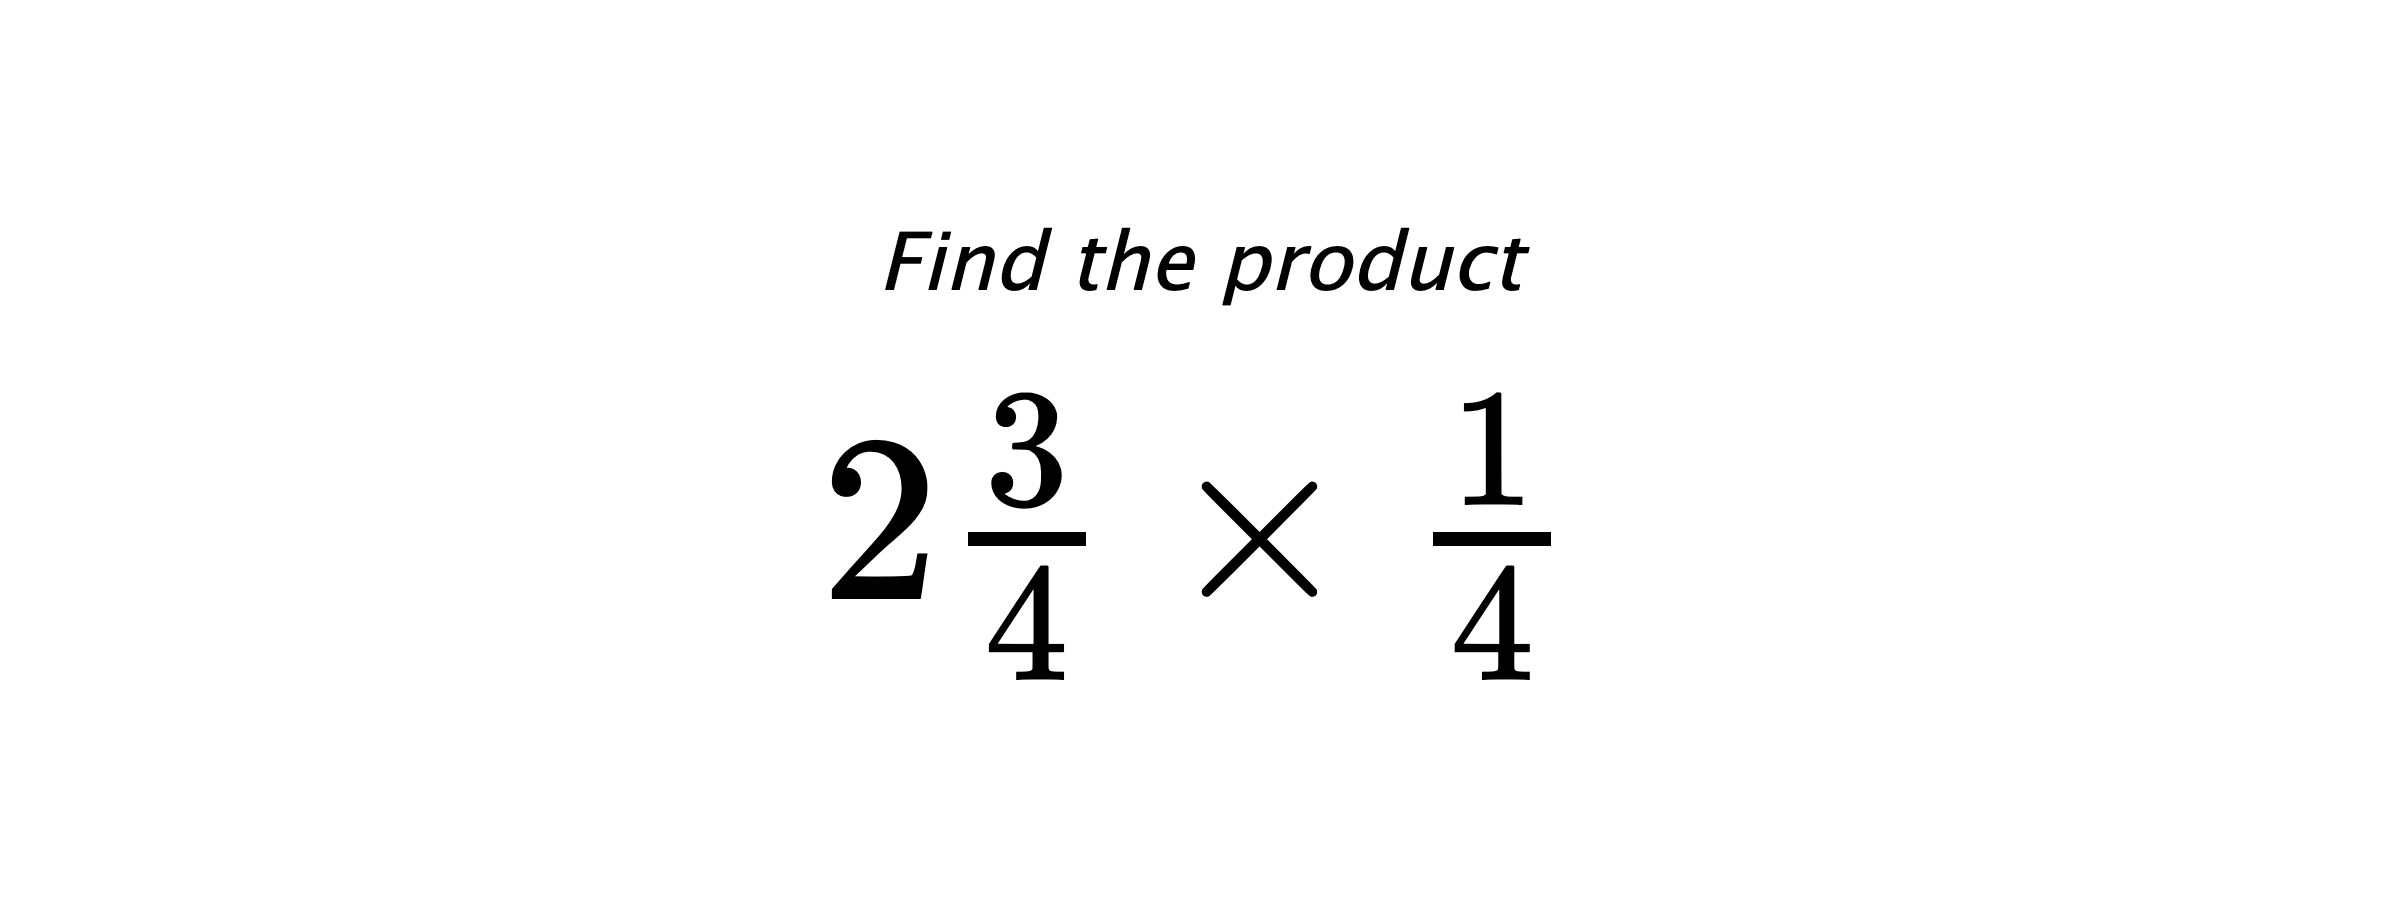 Find the product $ 2\frac{3}{4} \times \frac{1}{4} $